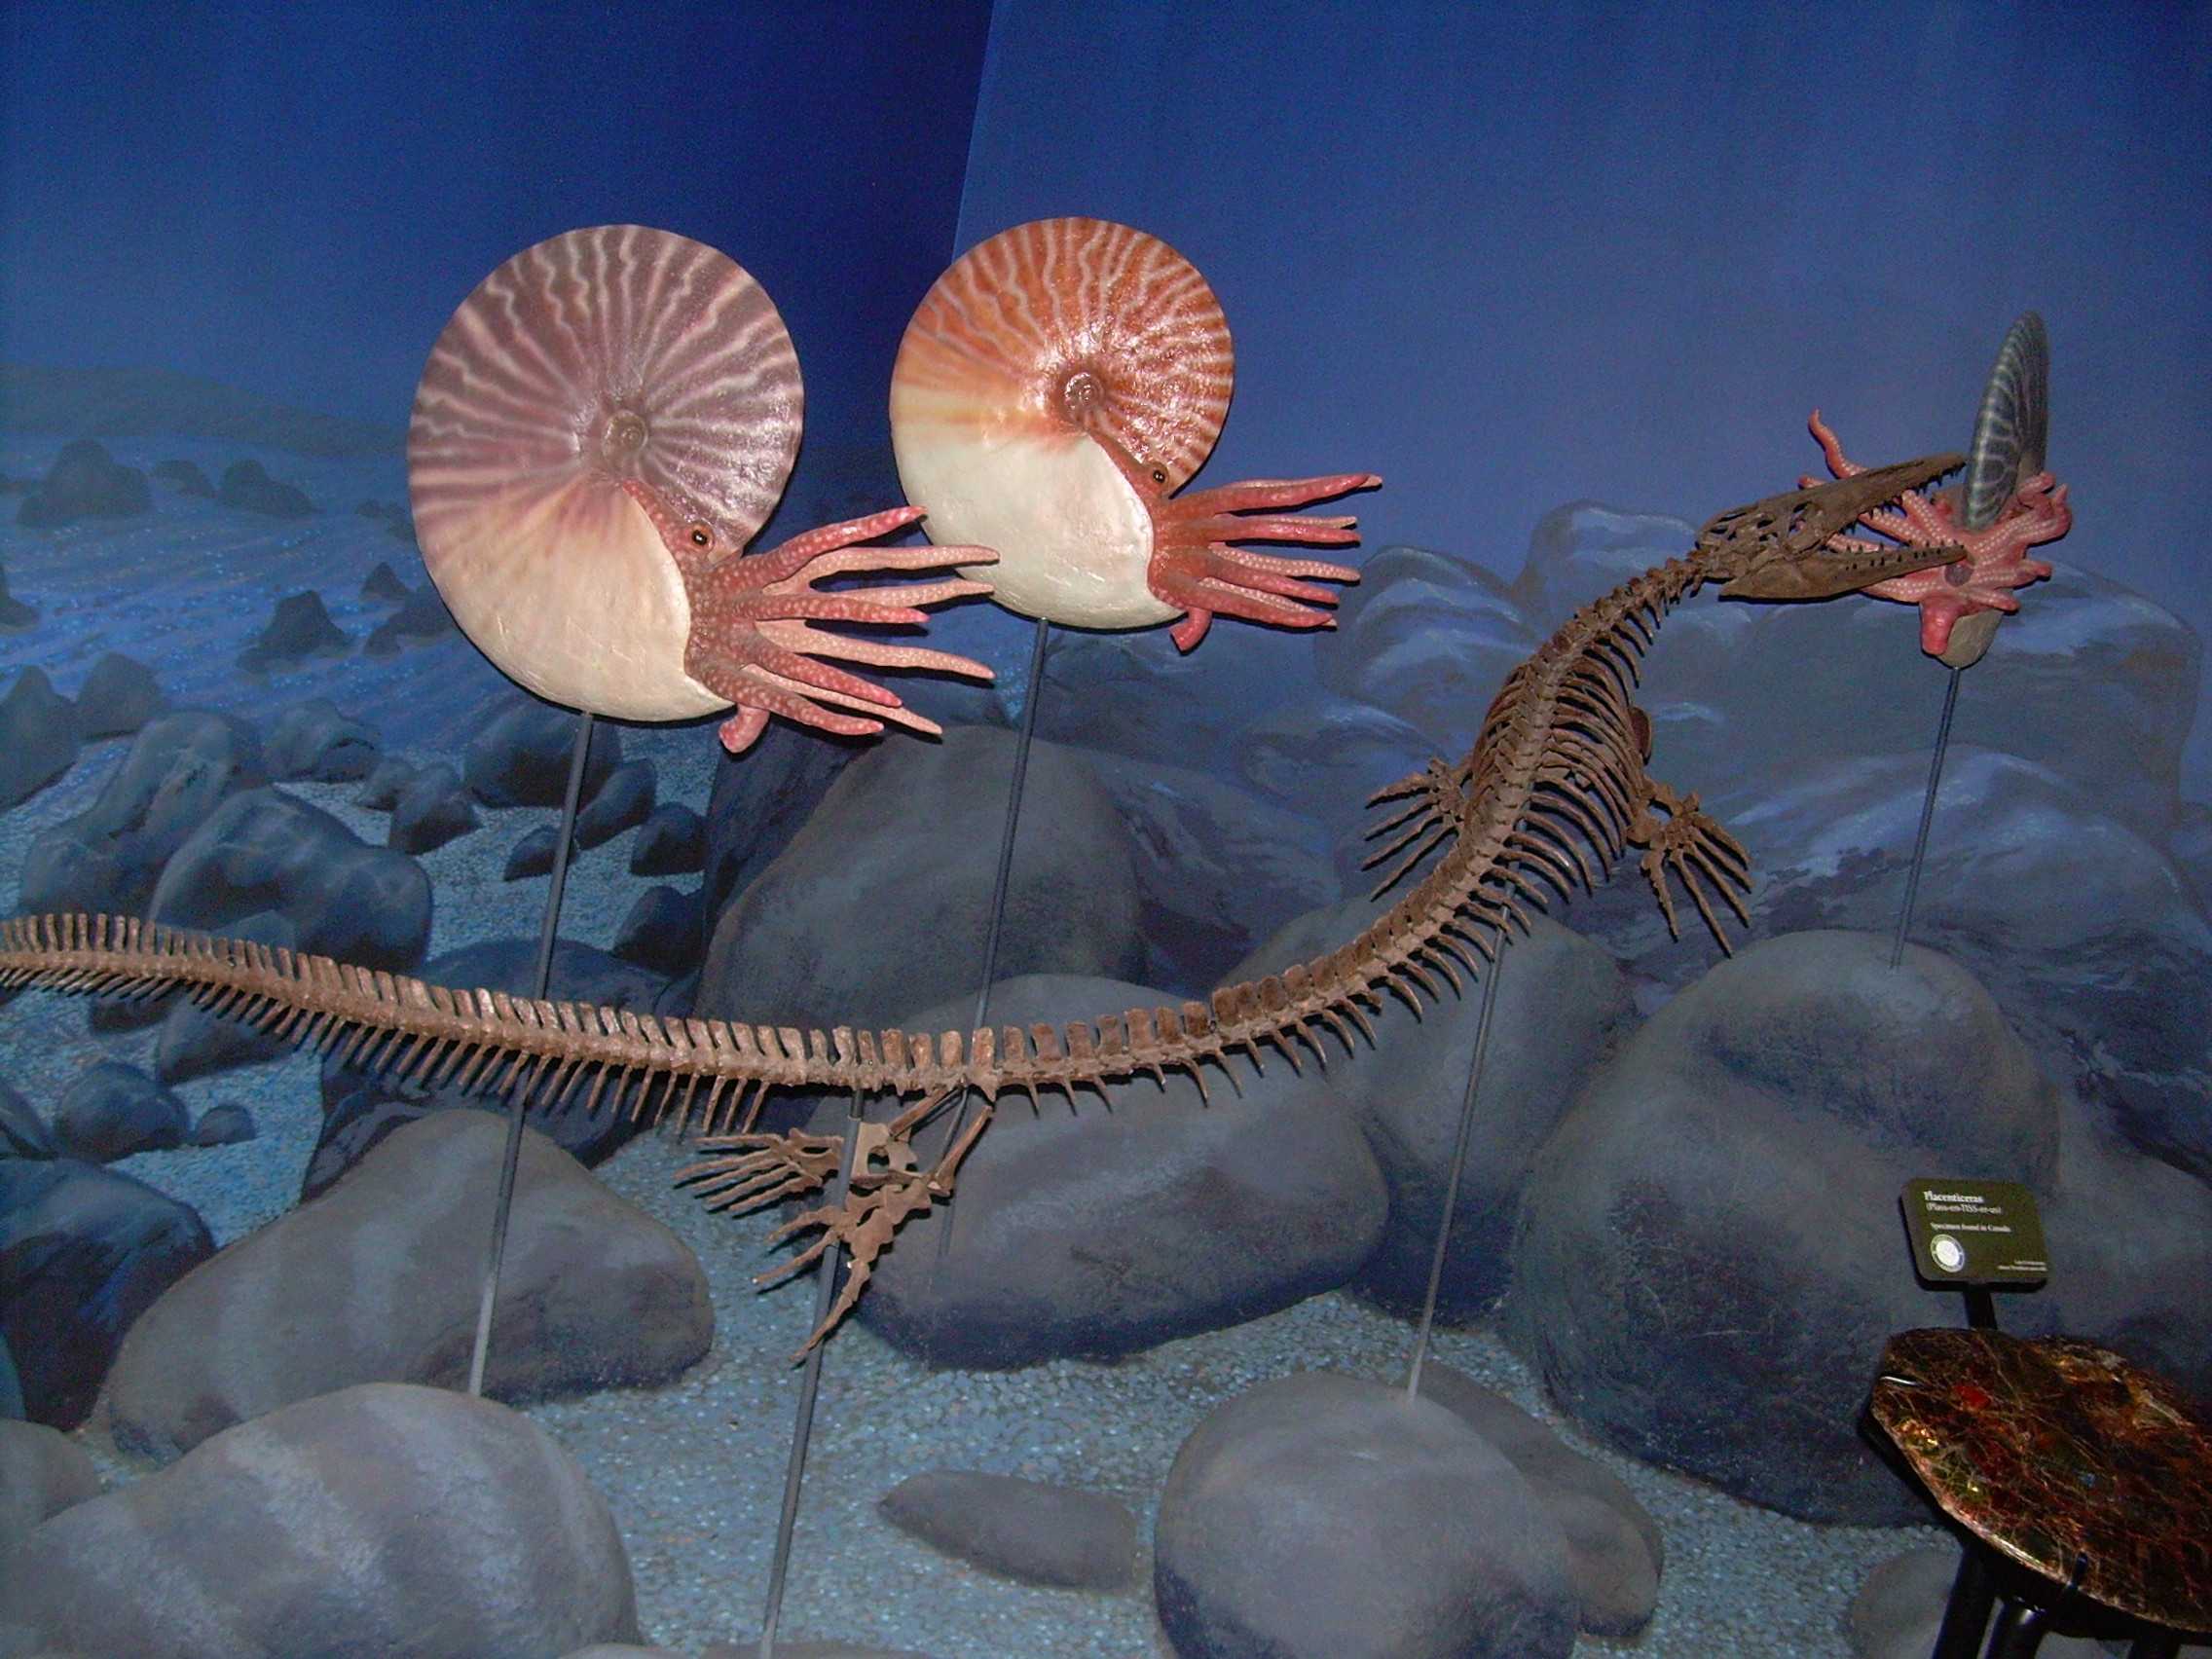 Fossil cast of a Clidastes propython skeleton next to some ammonite models at the North American Museum of Ancient Life.